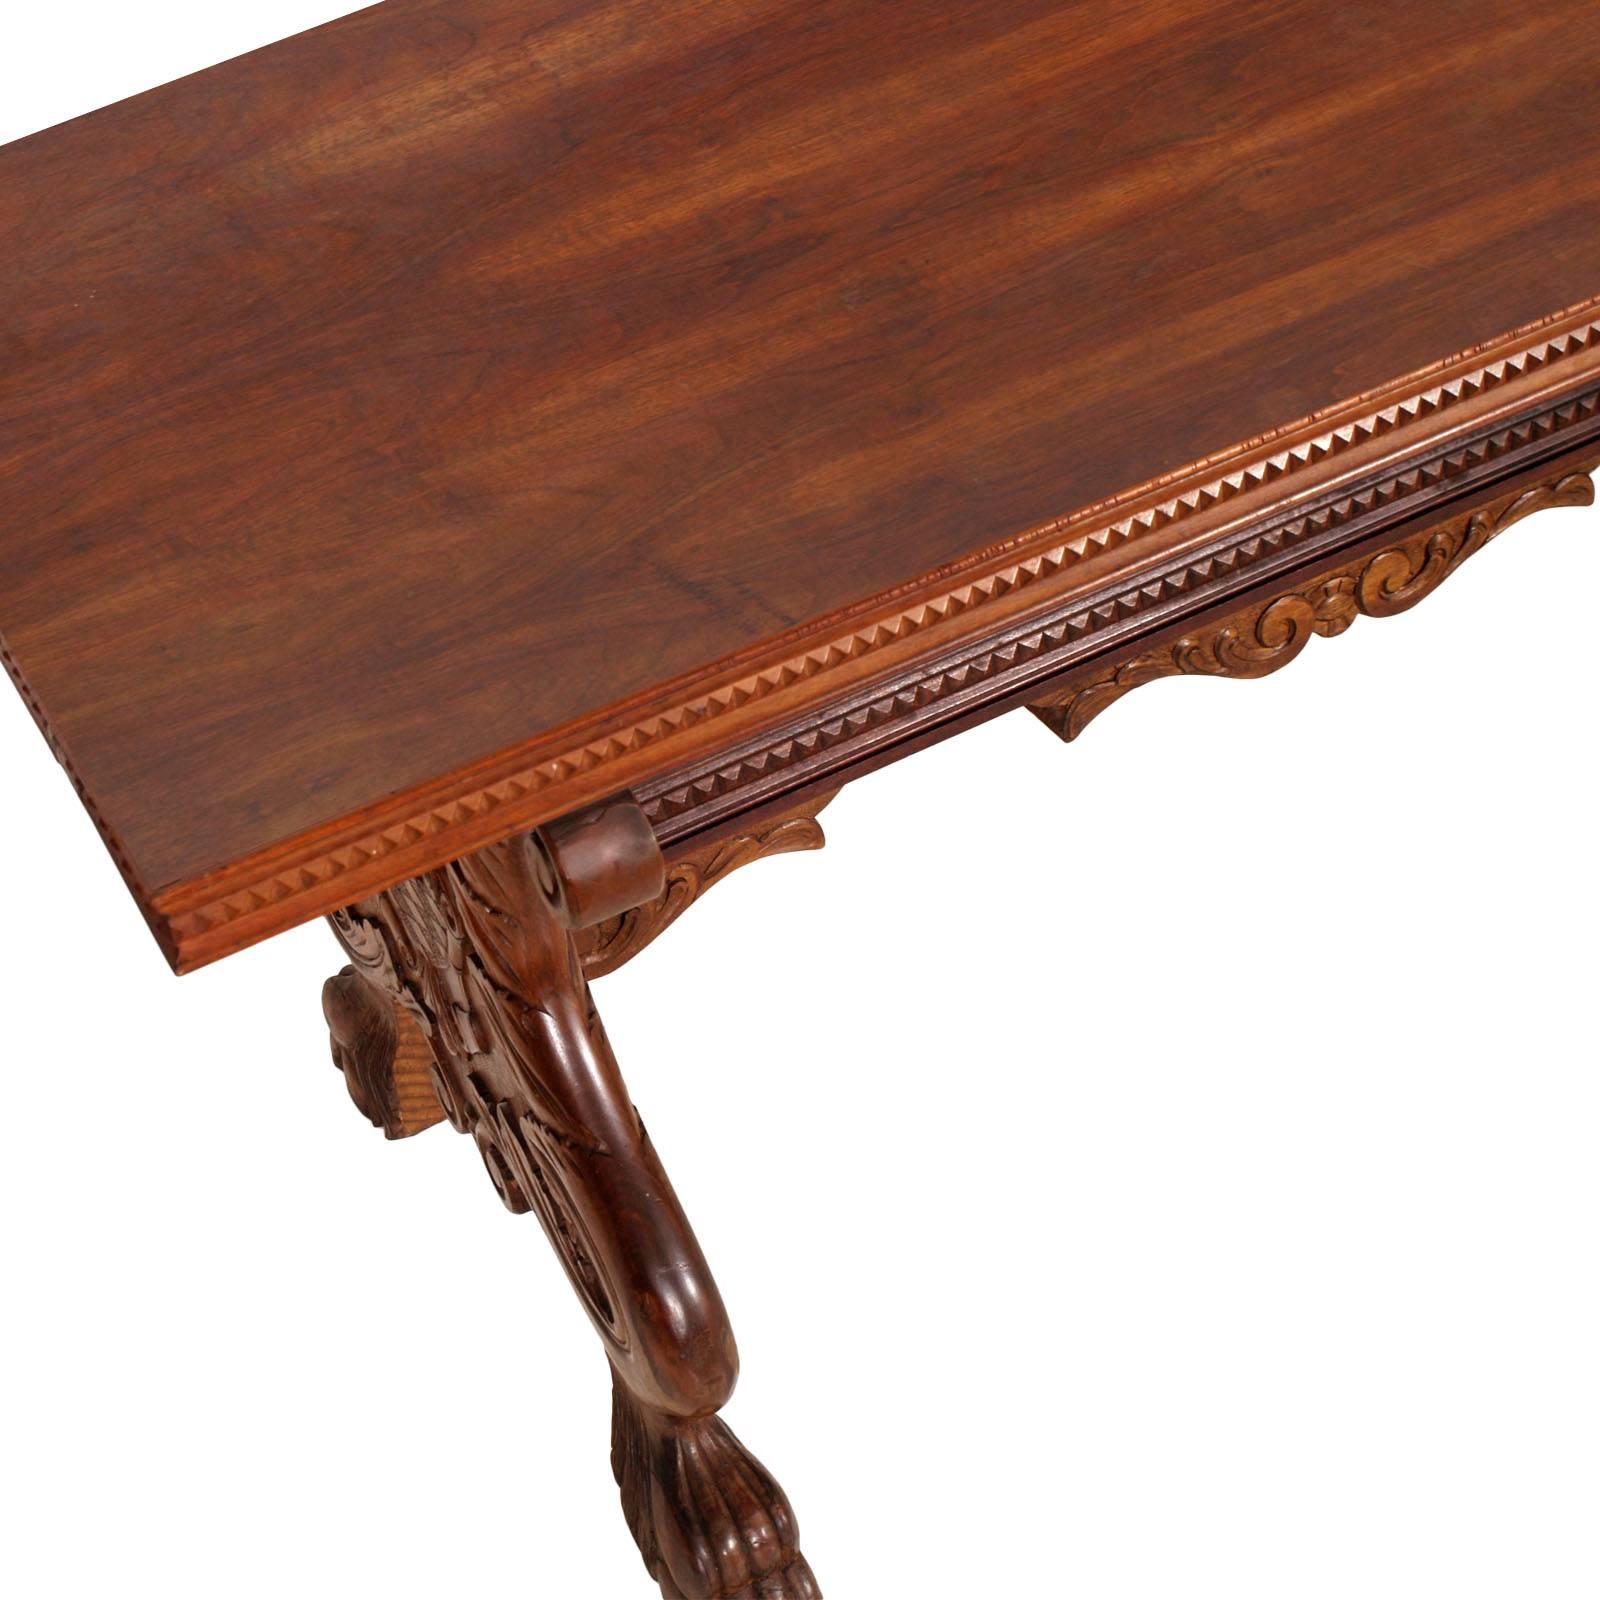 Renaissance Revival Early 20th Century Tuscany Carved Extendable Walnut Table by Michele Bonciani For Sale